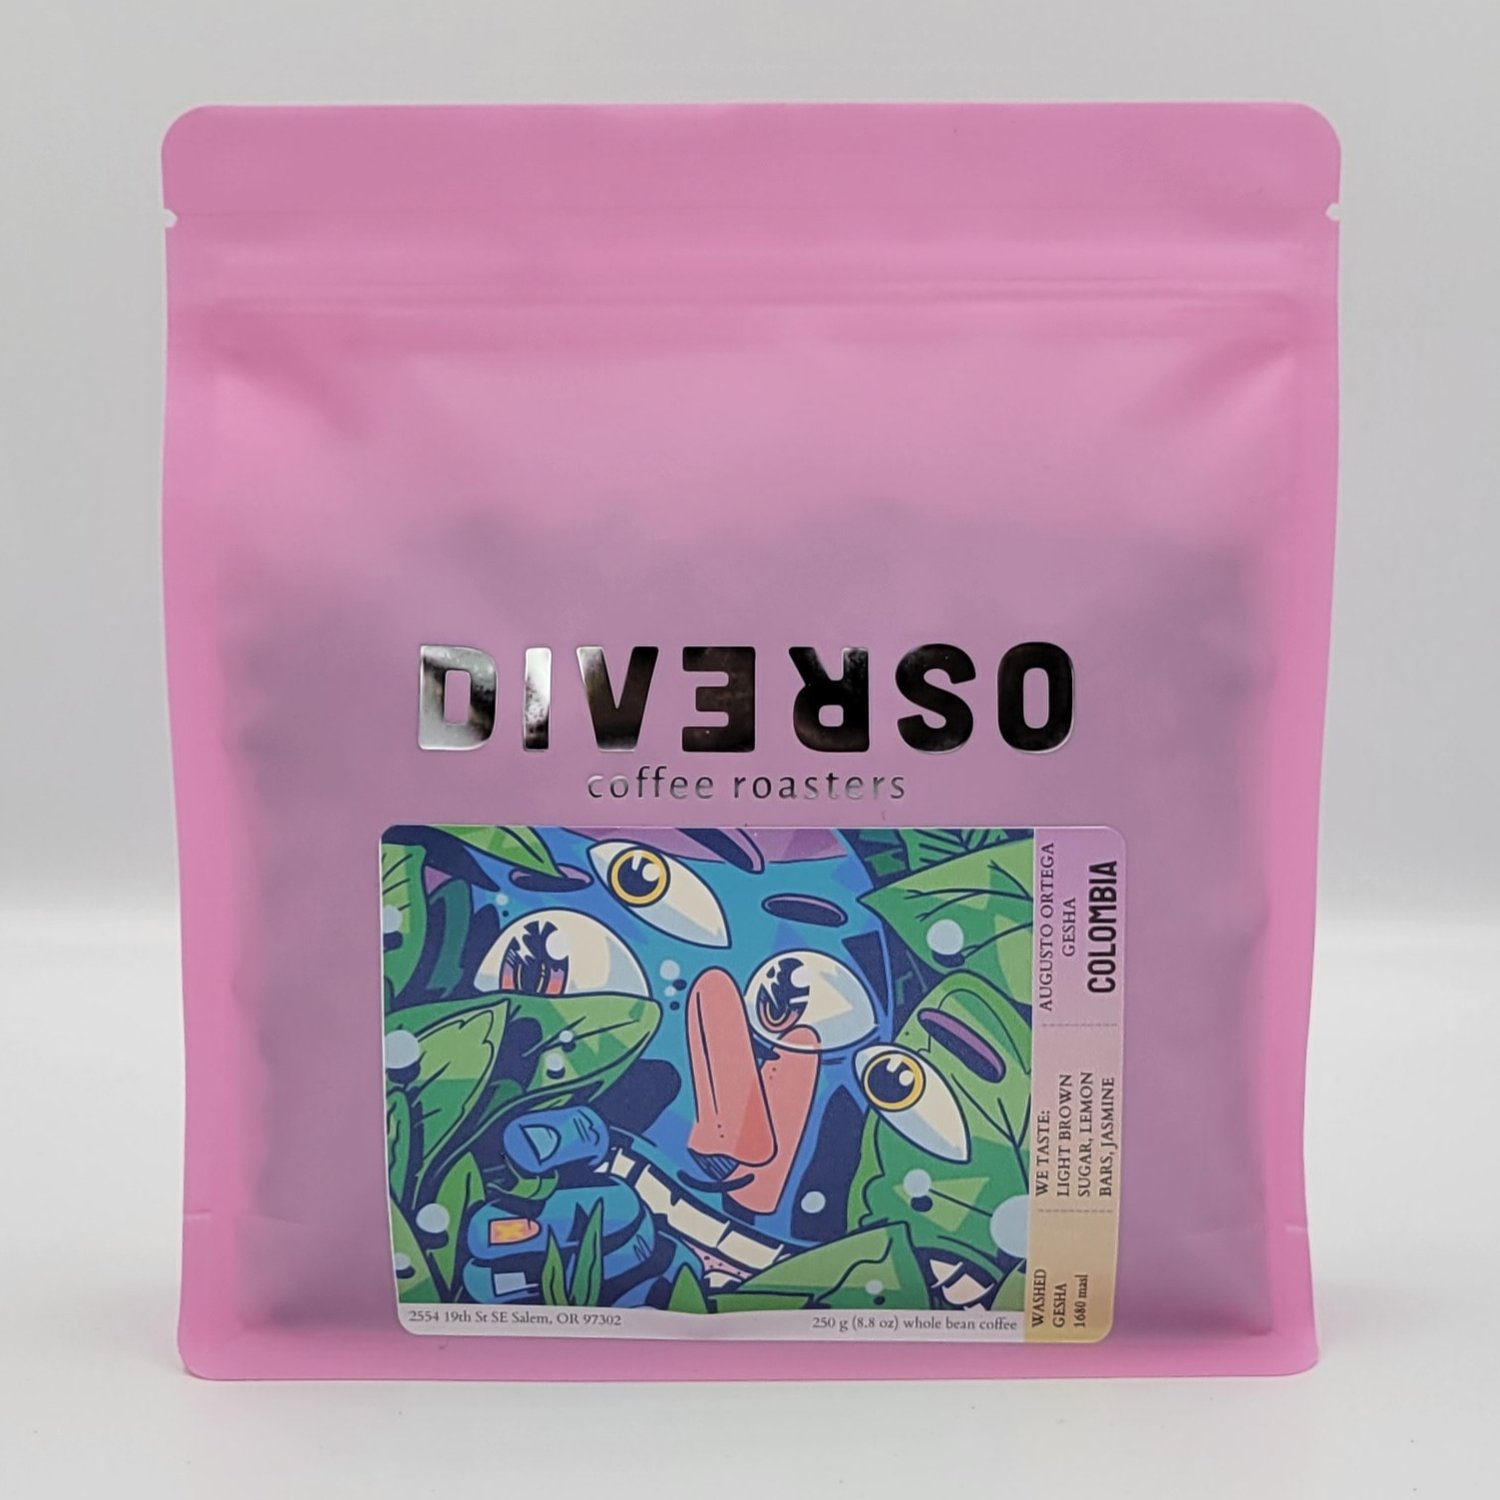 Diverso Coffee Roasters